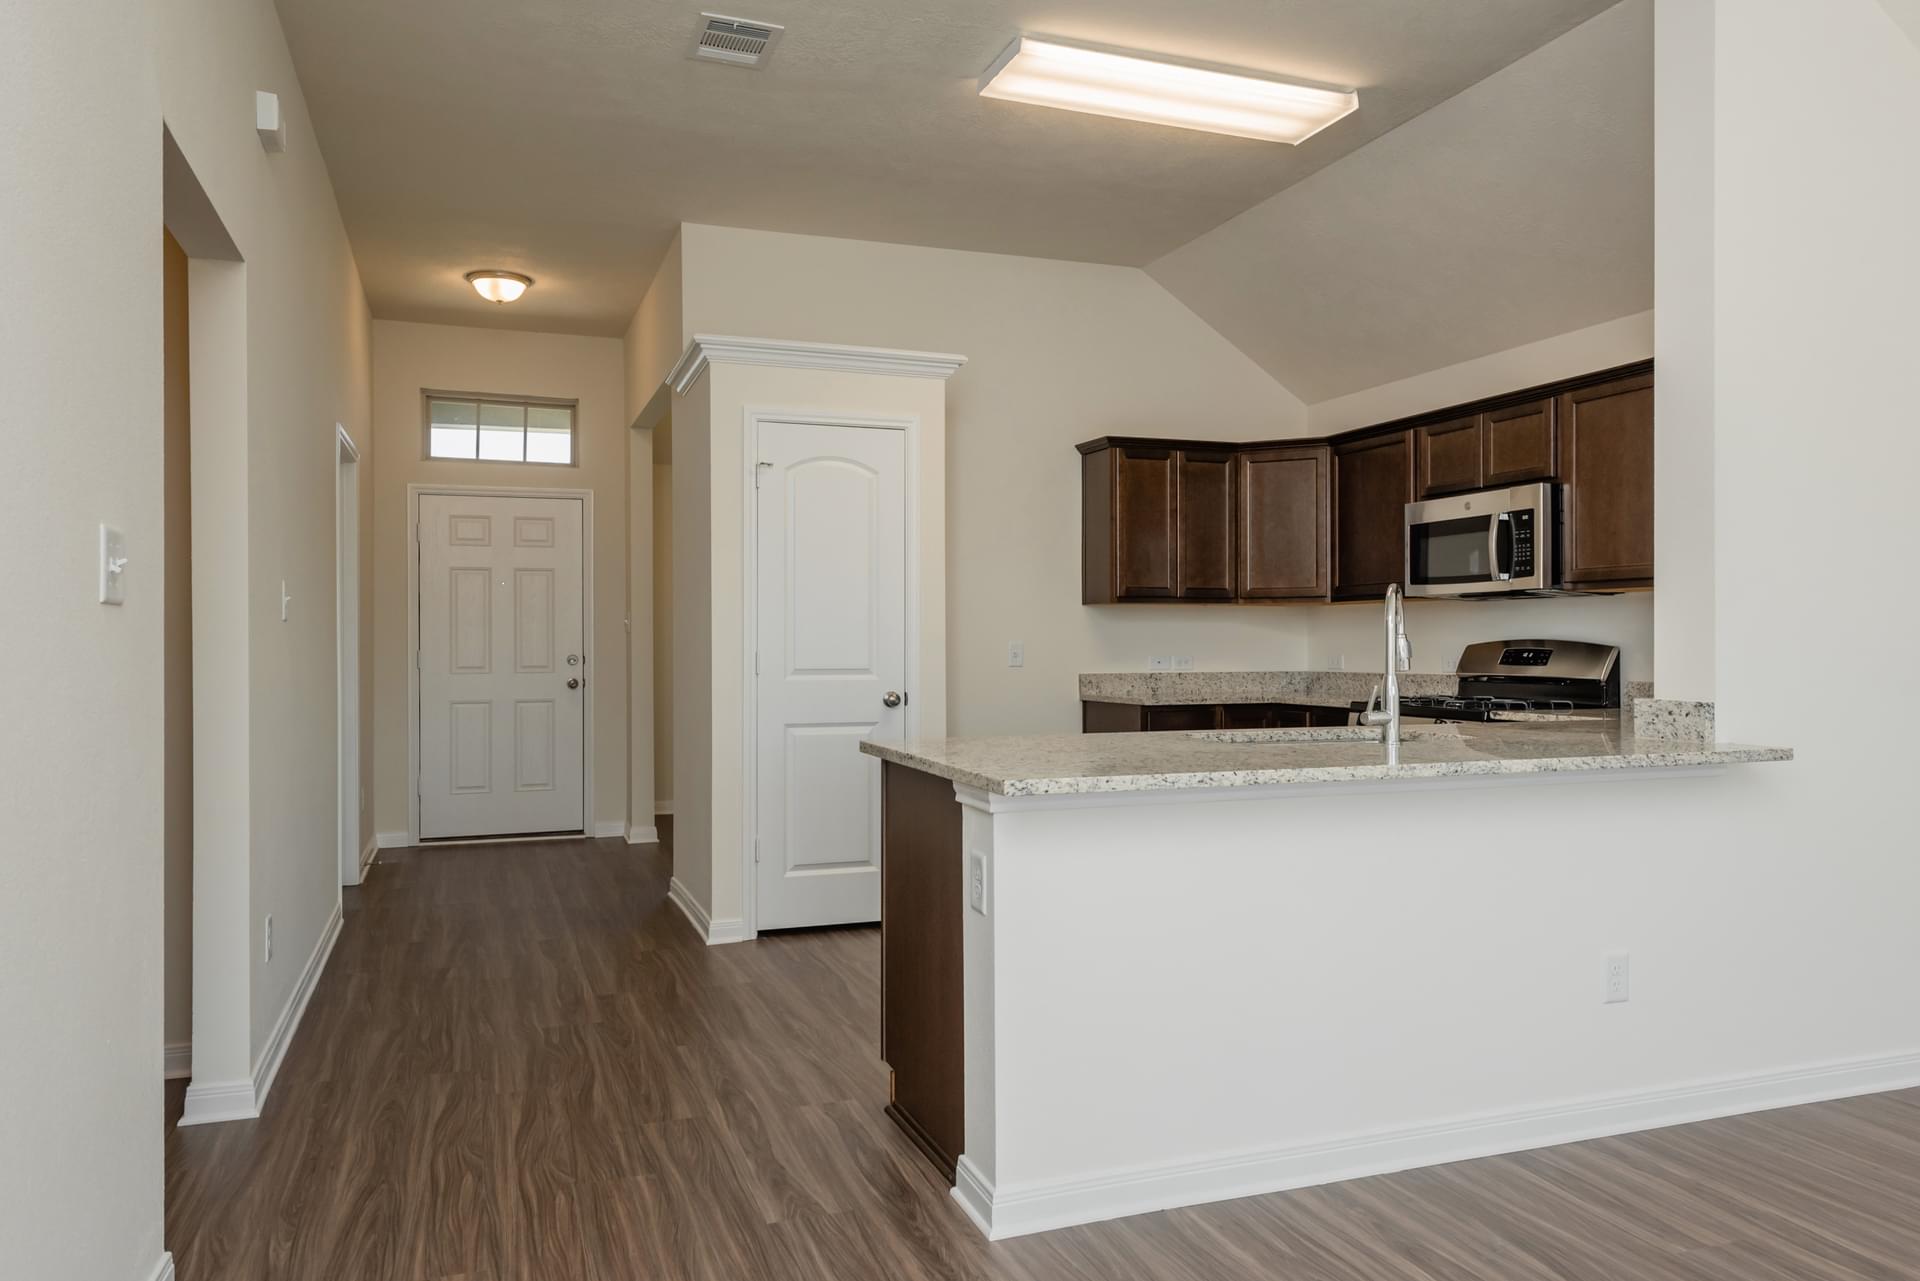 3br New Home in Belton, TX